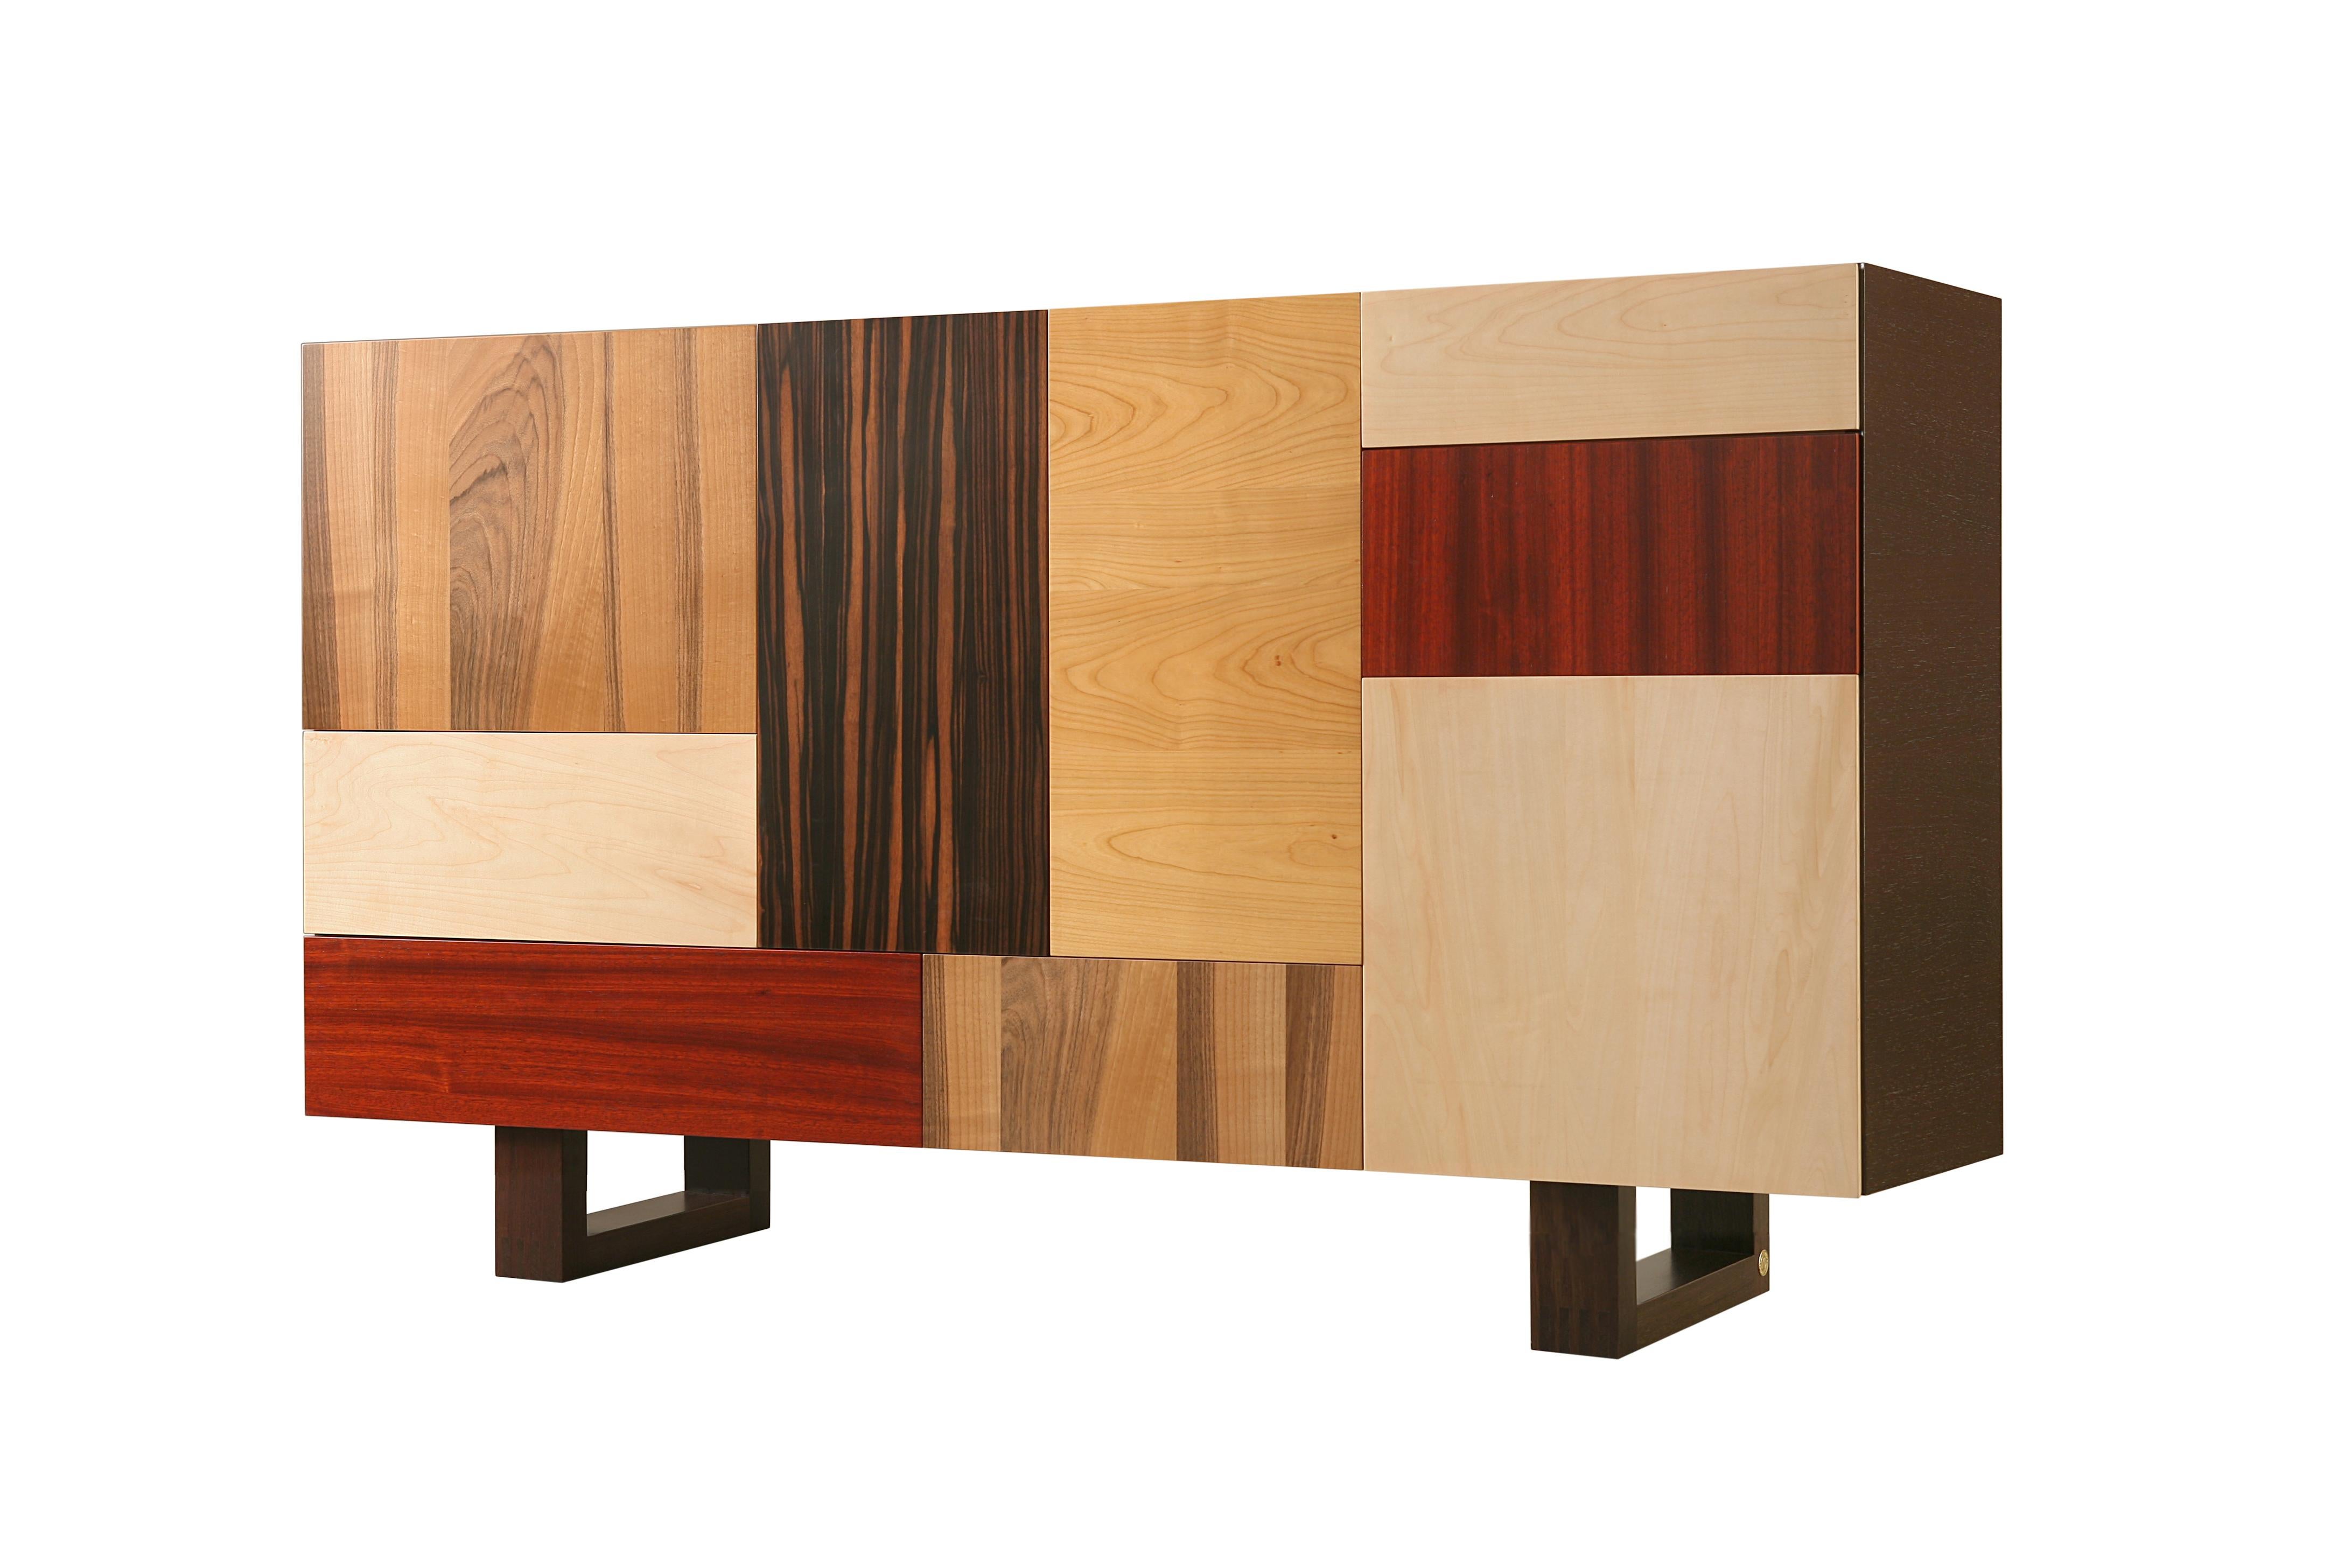 Fantesca is a contemporary sideboard made of ashwood with 2 drawers and 4 doors.
The front doors are made of cherry, walnut, ebony, padouk, and maple wood.
The ash frame can be customized with different wood finishes
Made in italy by Morelato

 